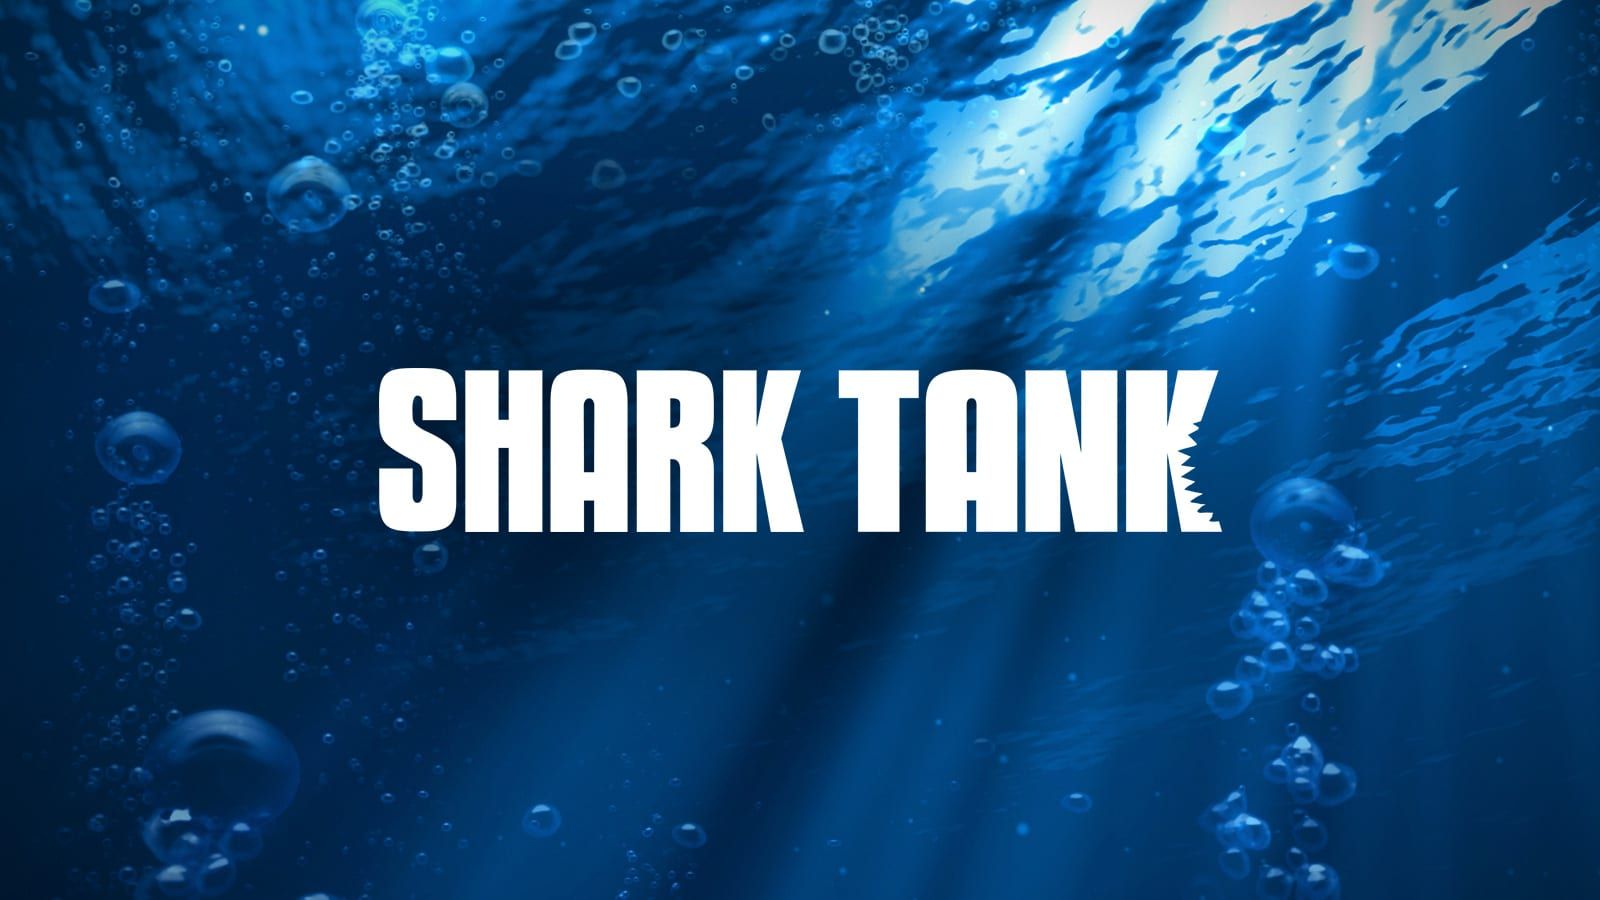 Shark Case In The Jimmy Falls Show Background, Picture Of Shark Tank, Shark,  Sea Background Image And Wallpaper for Free Download